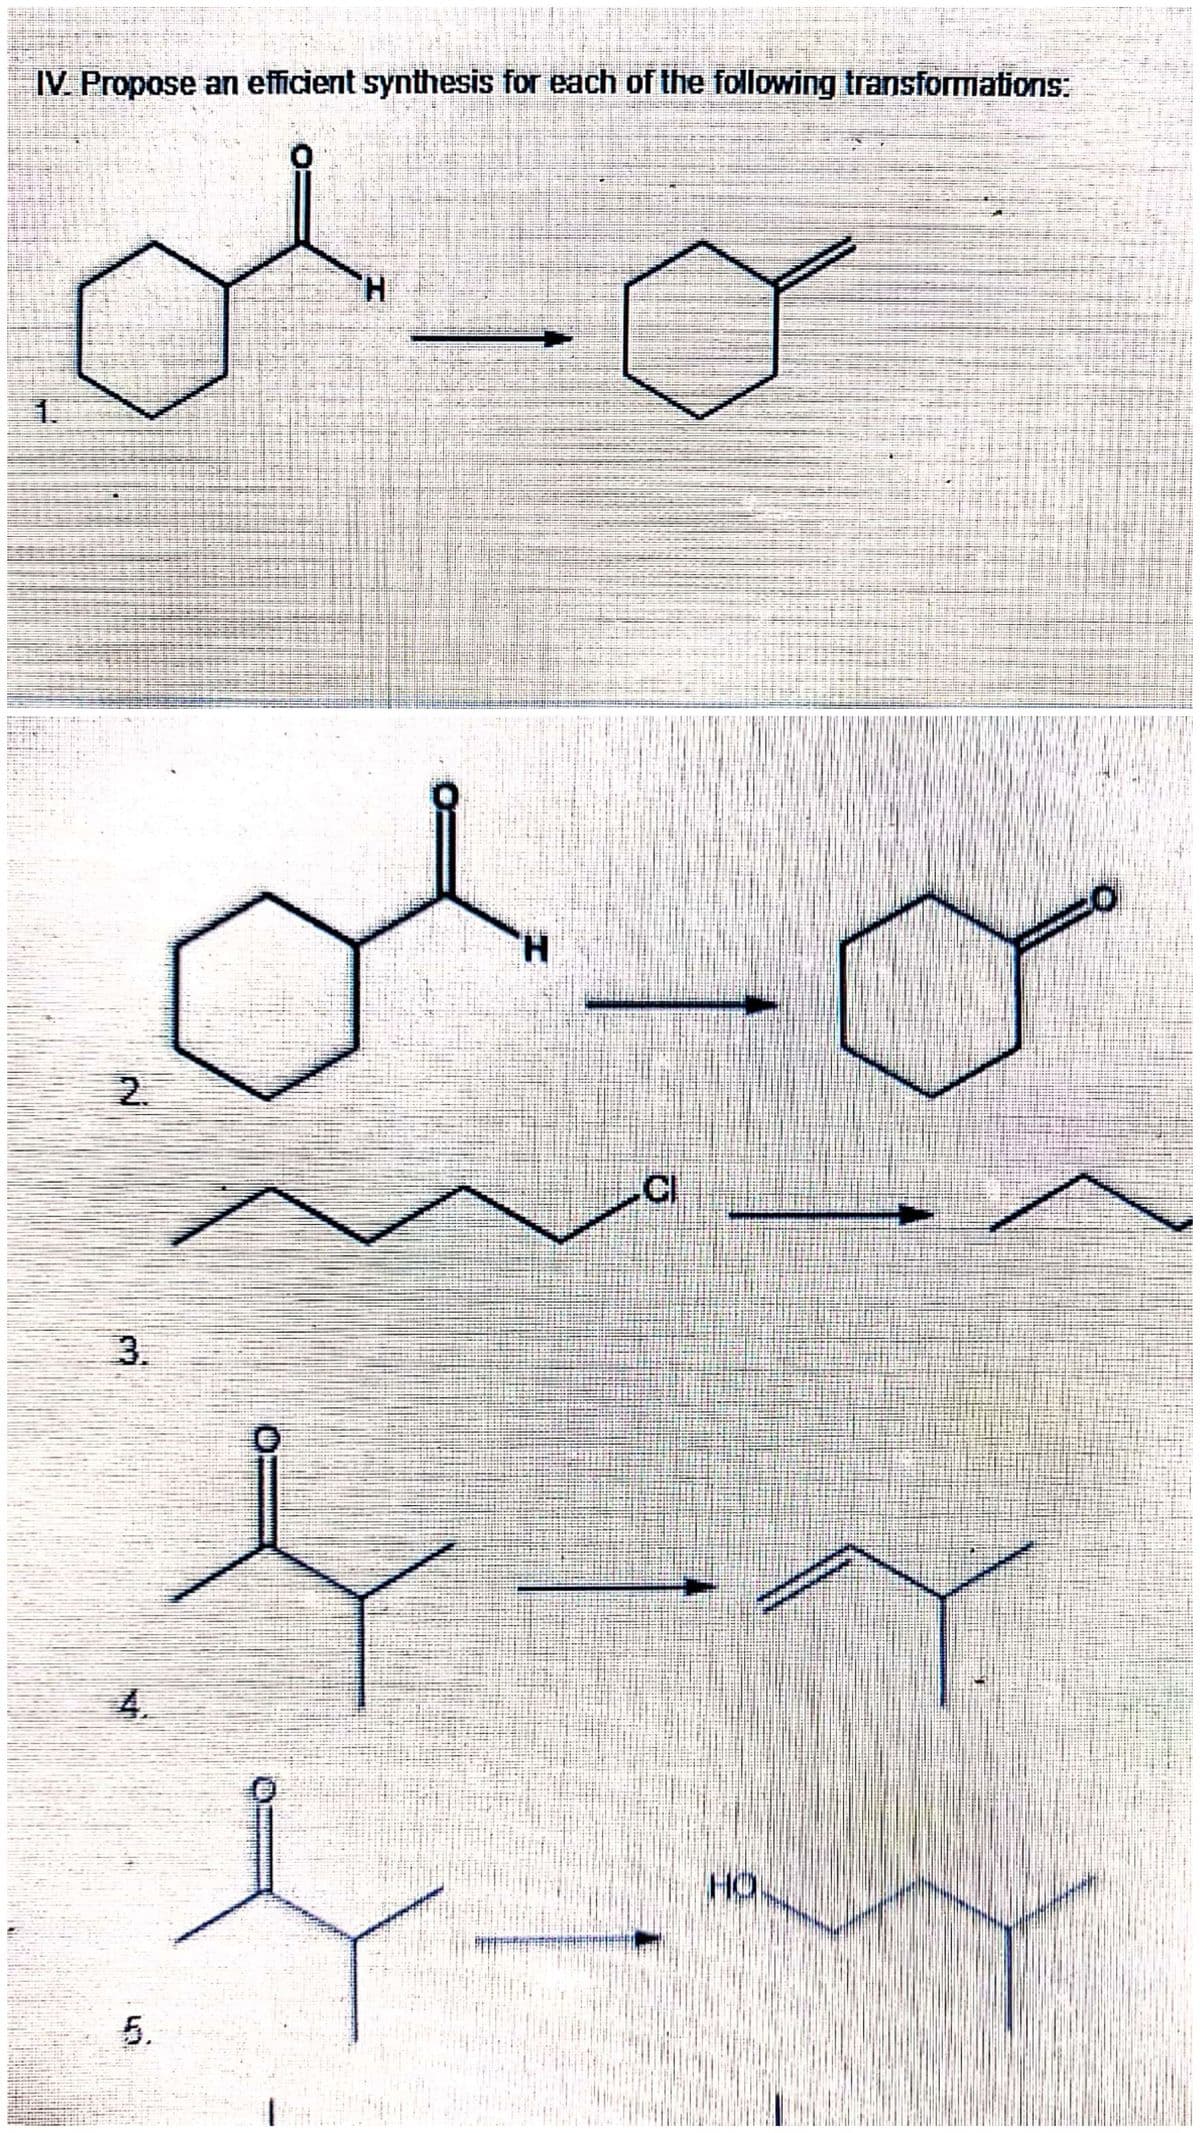 IV. Propose an efficient synthesis for each of the following transformations:
H.
1.
2.
3.
4.
5.
